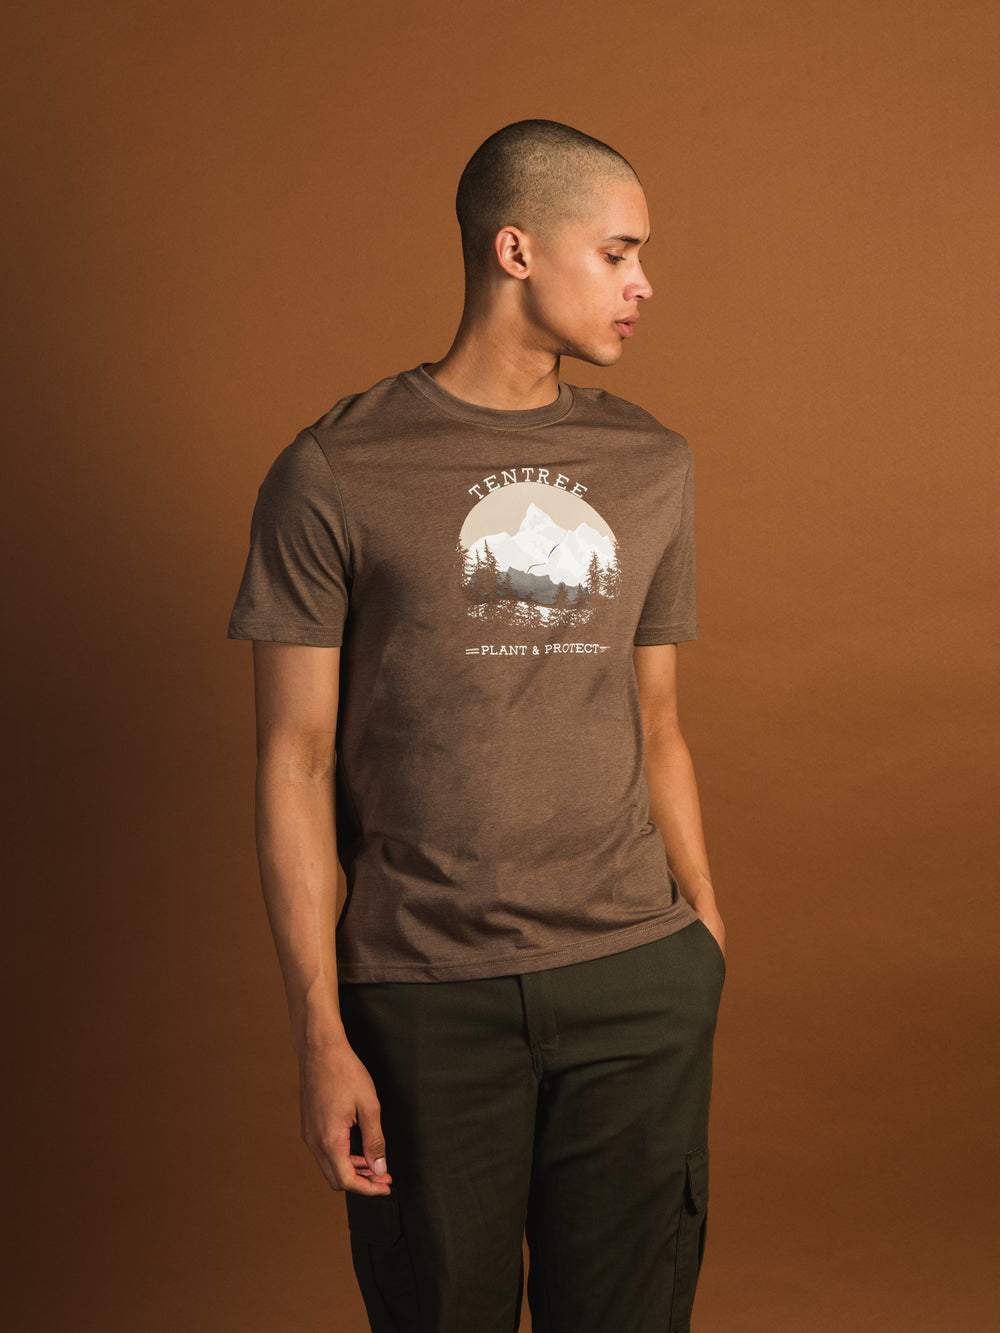 TENTREE PLANT & PROTECT T-SHIRT